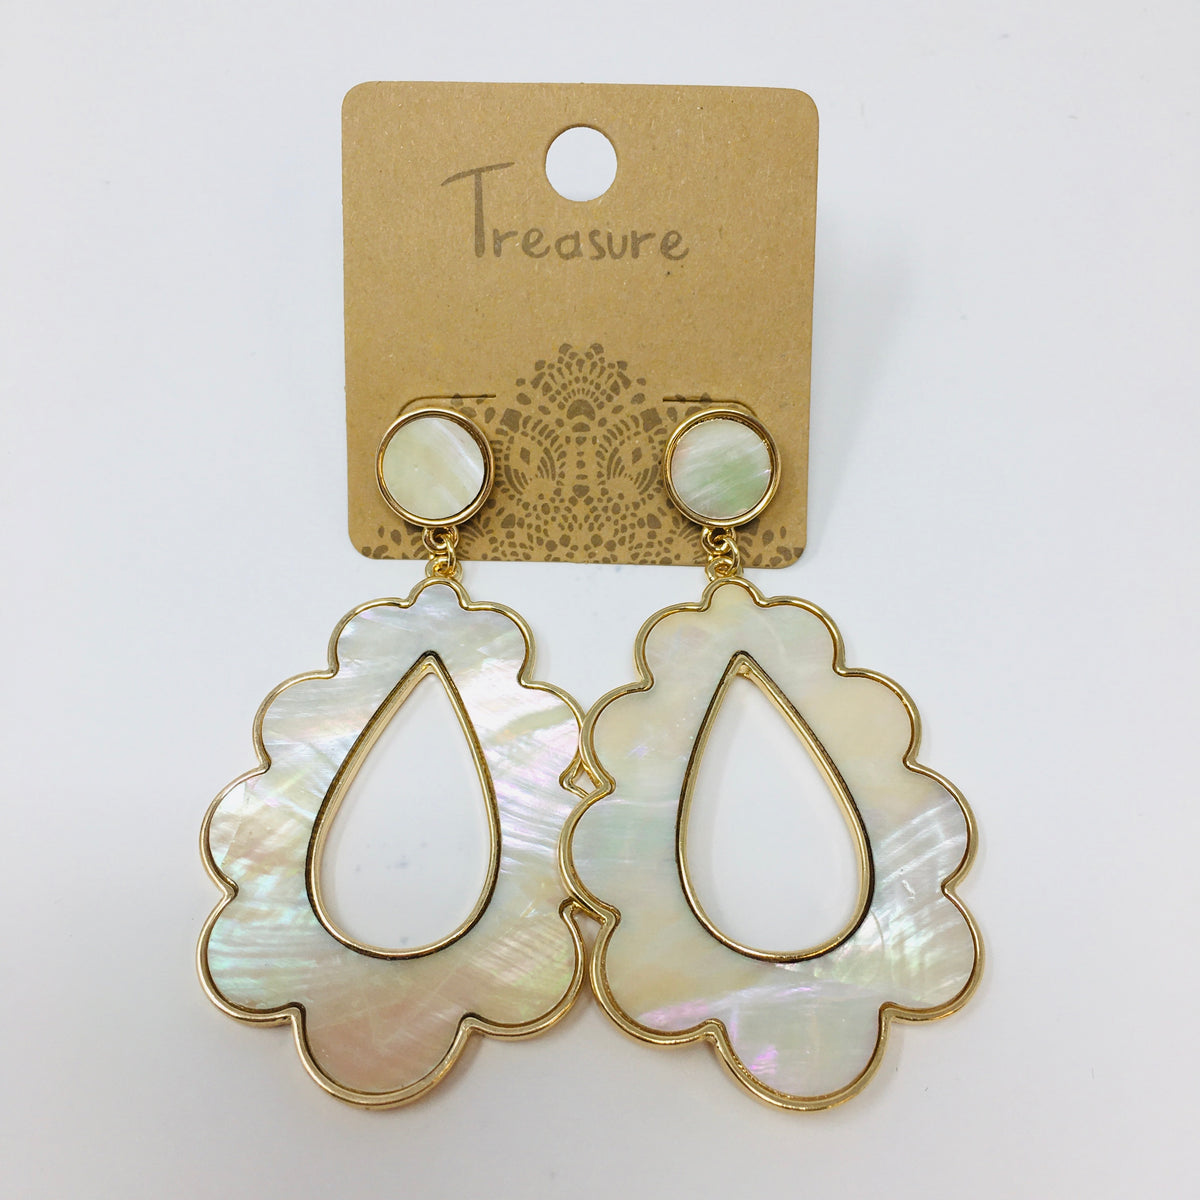 Scalloped teardrop shaped gold tone earrings with mother of pearl inserts shown on a white background